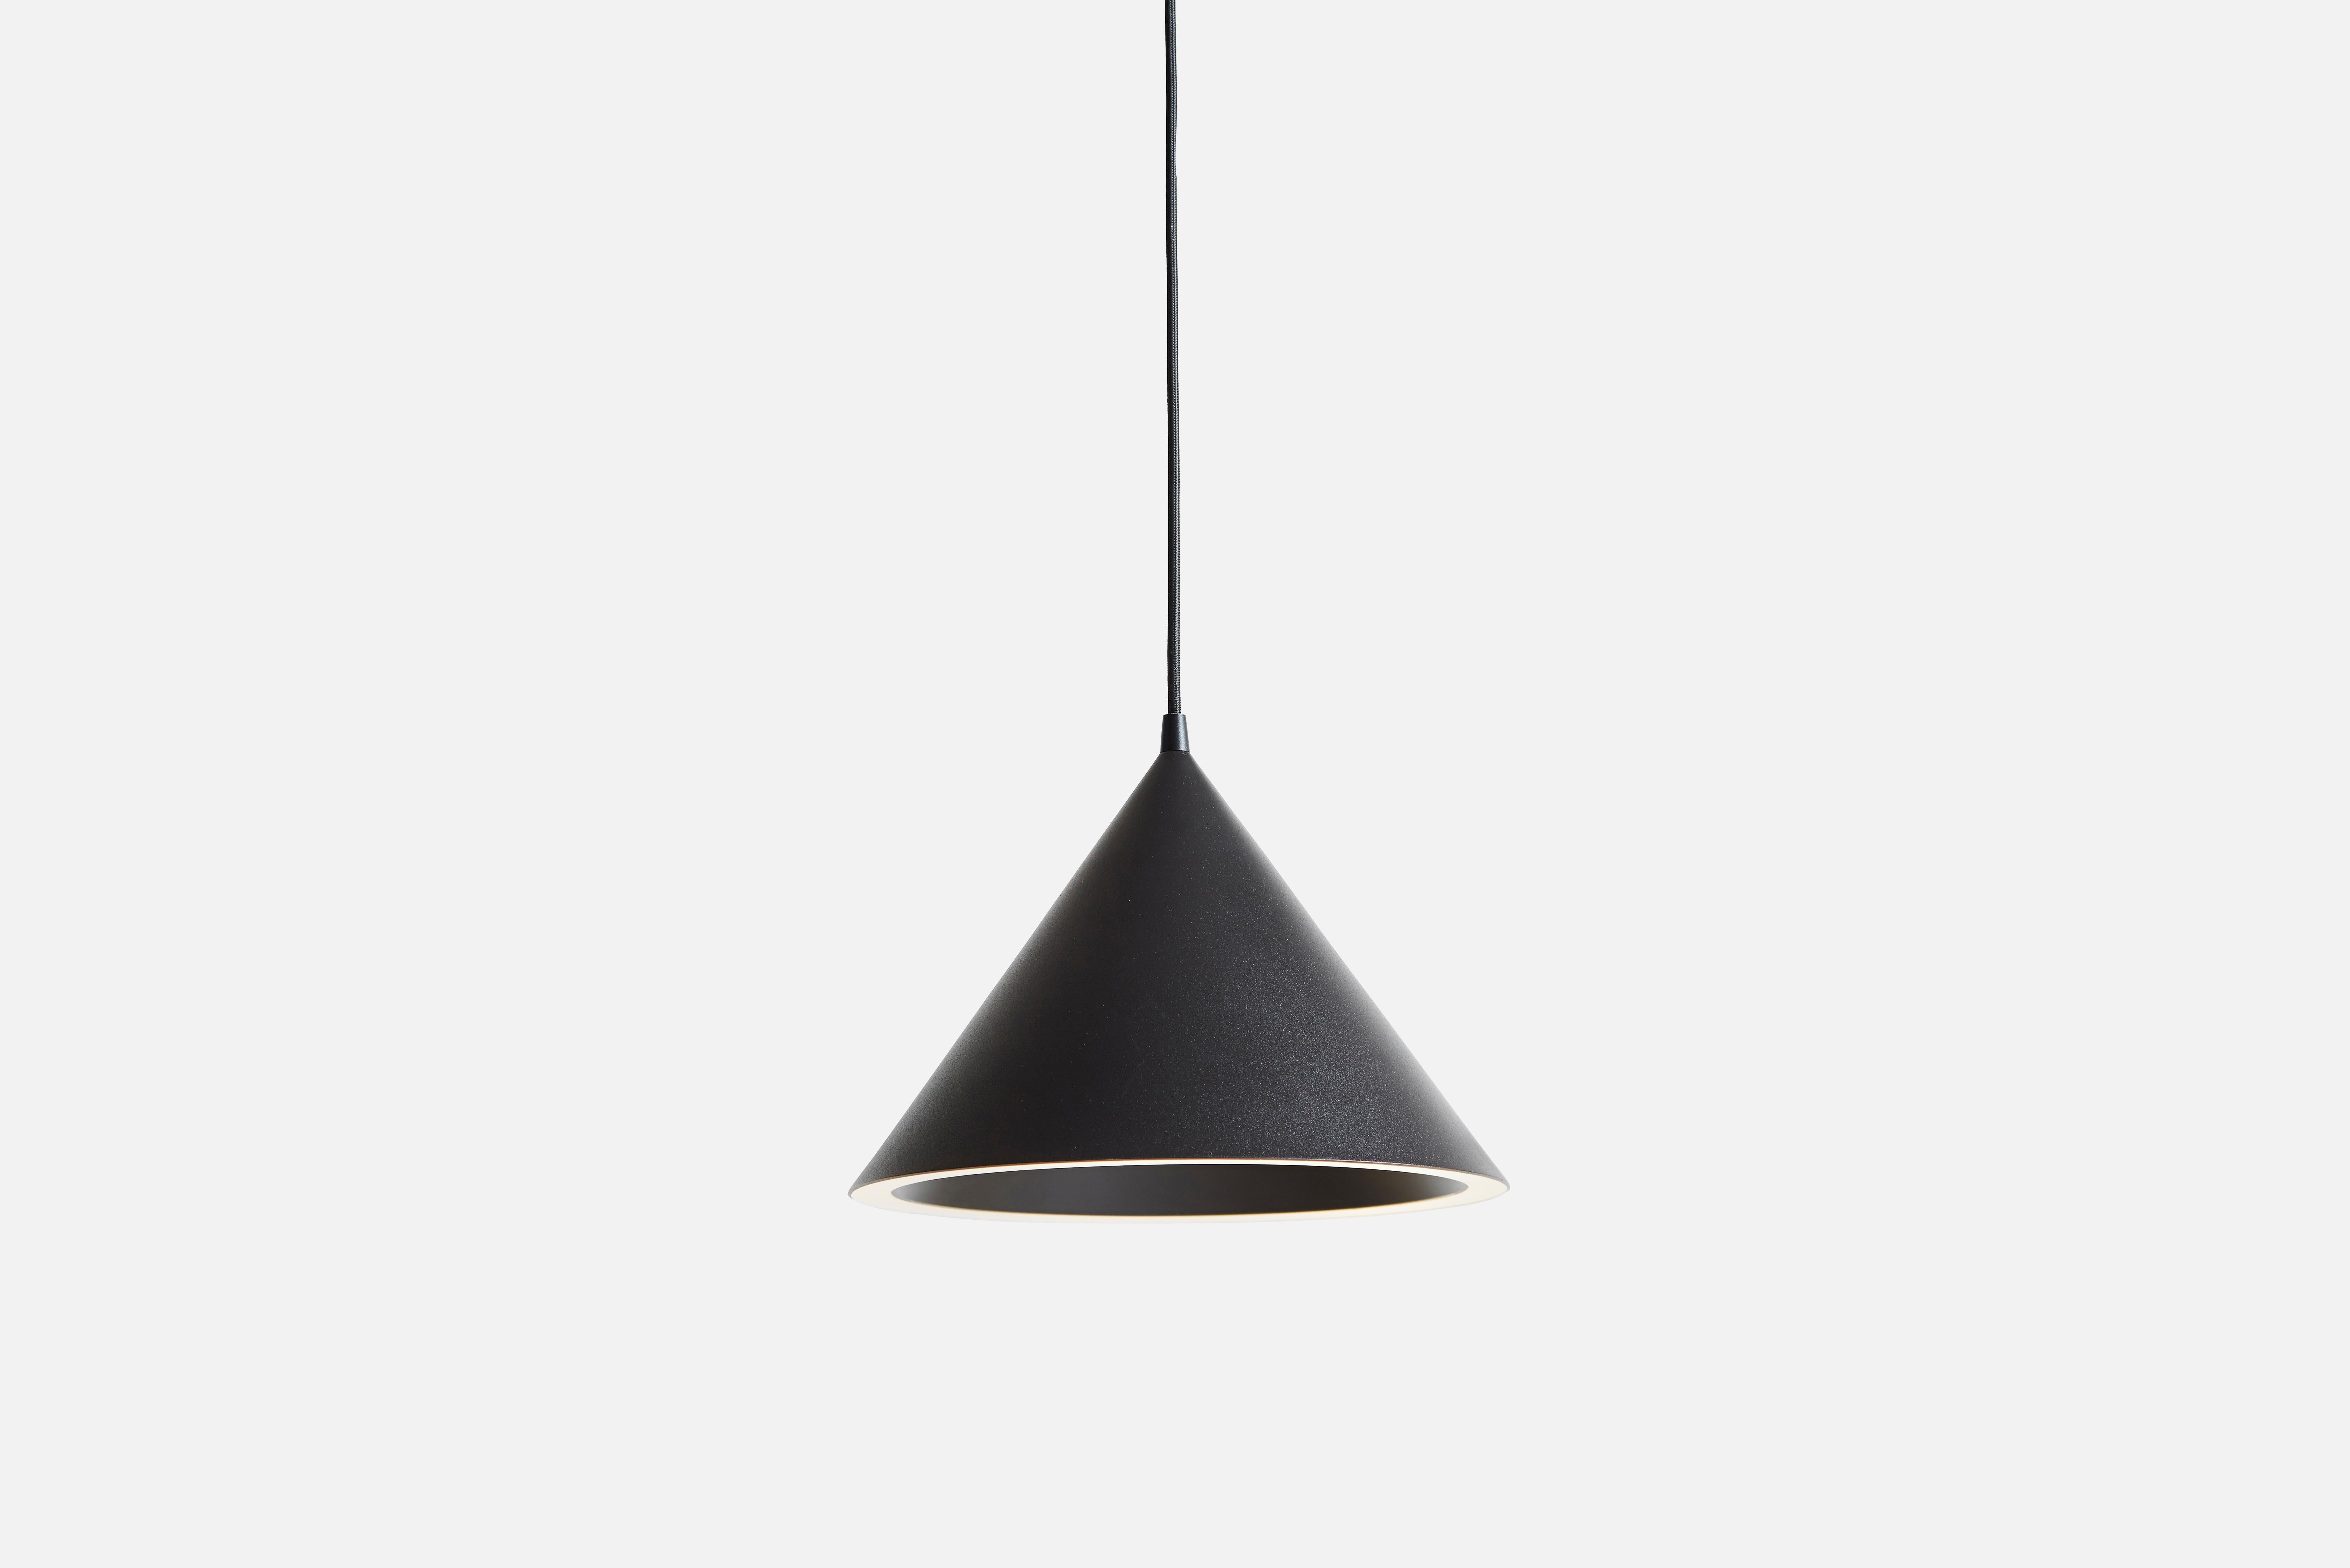 Small black Annular pendant lamp by MSDS Studio.
Materials: Aluminum.
Dimensions: D 32 x H 23.8 cm.
Available in white, nude, mint, black.
Available in 2 sizes: D32, D46.8 cm.

MSDS STUDIO is a successful Canadian design studio that works in